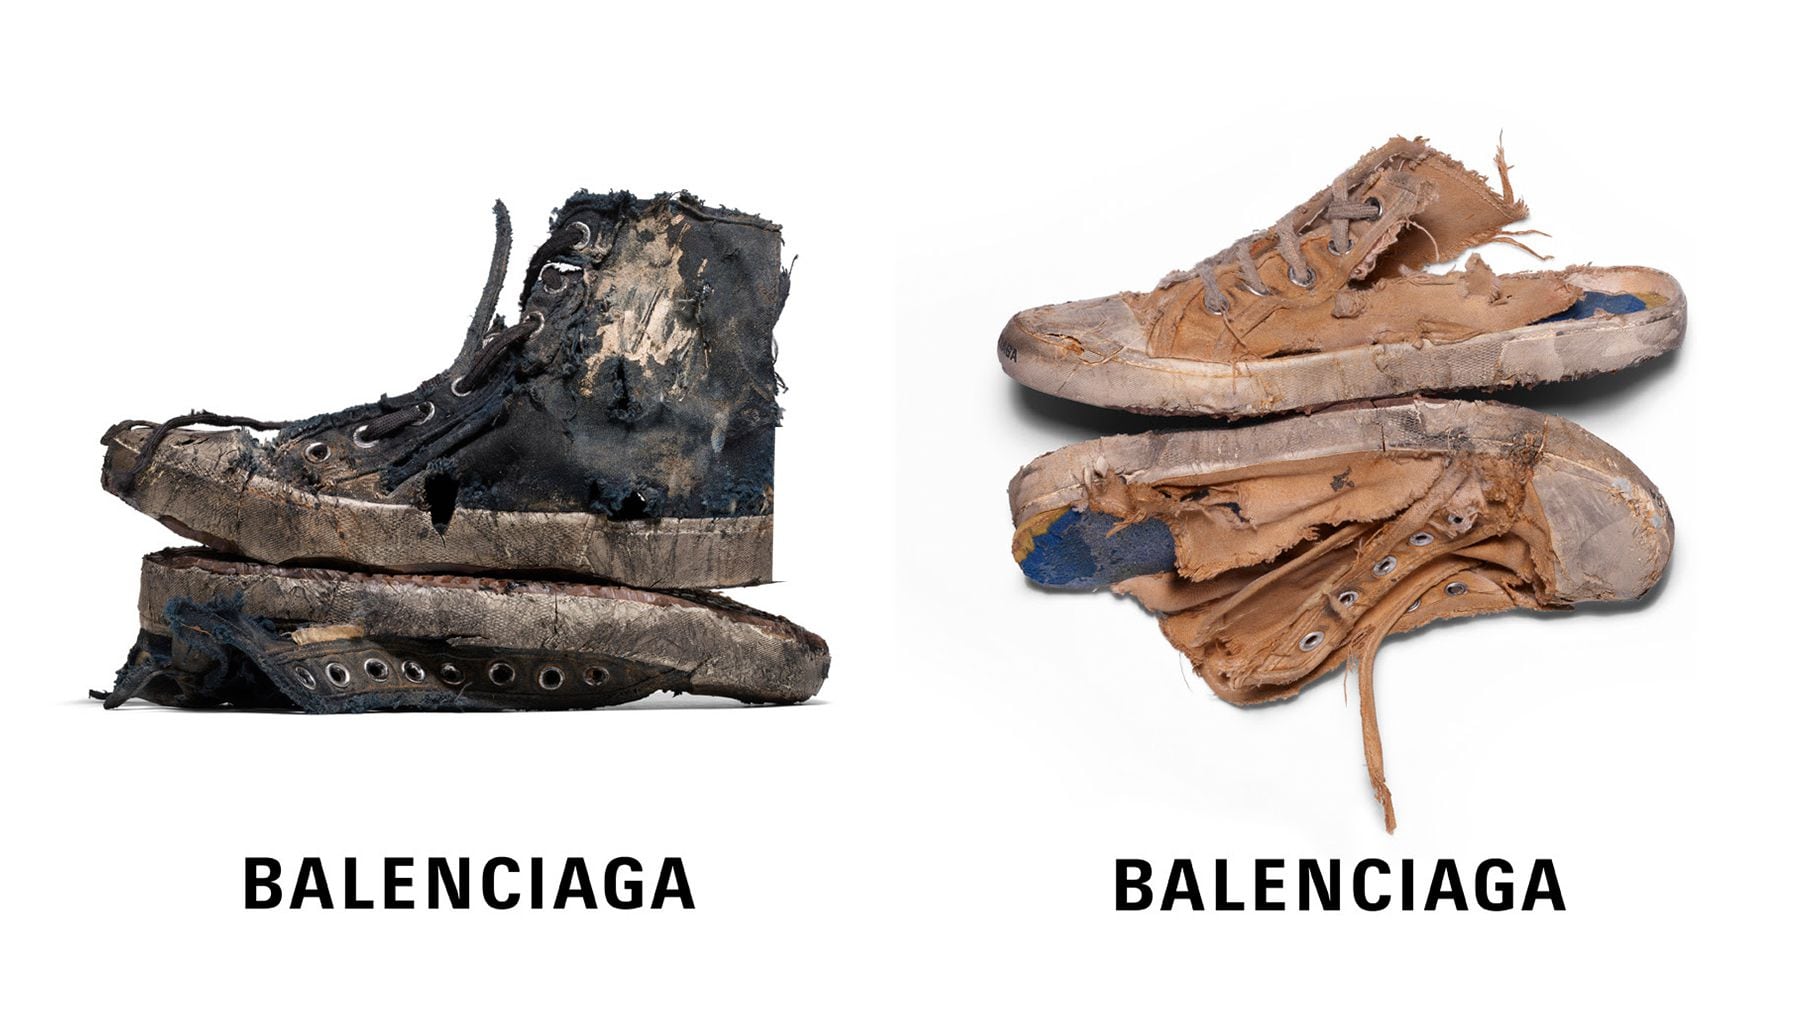 The Strategy Behind Balenciaga's Destroyed Sneaker Stunt